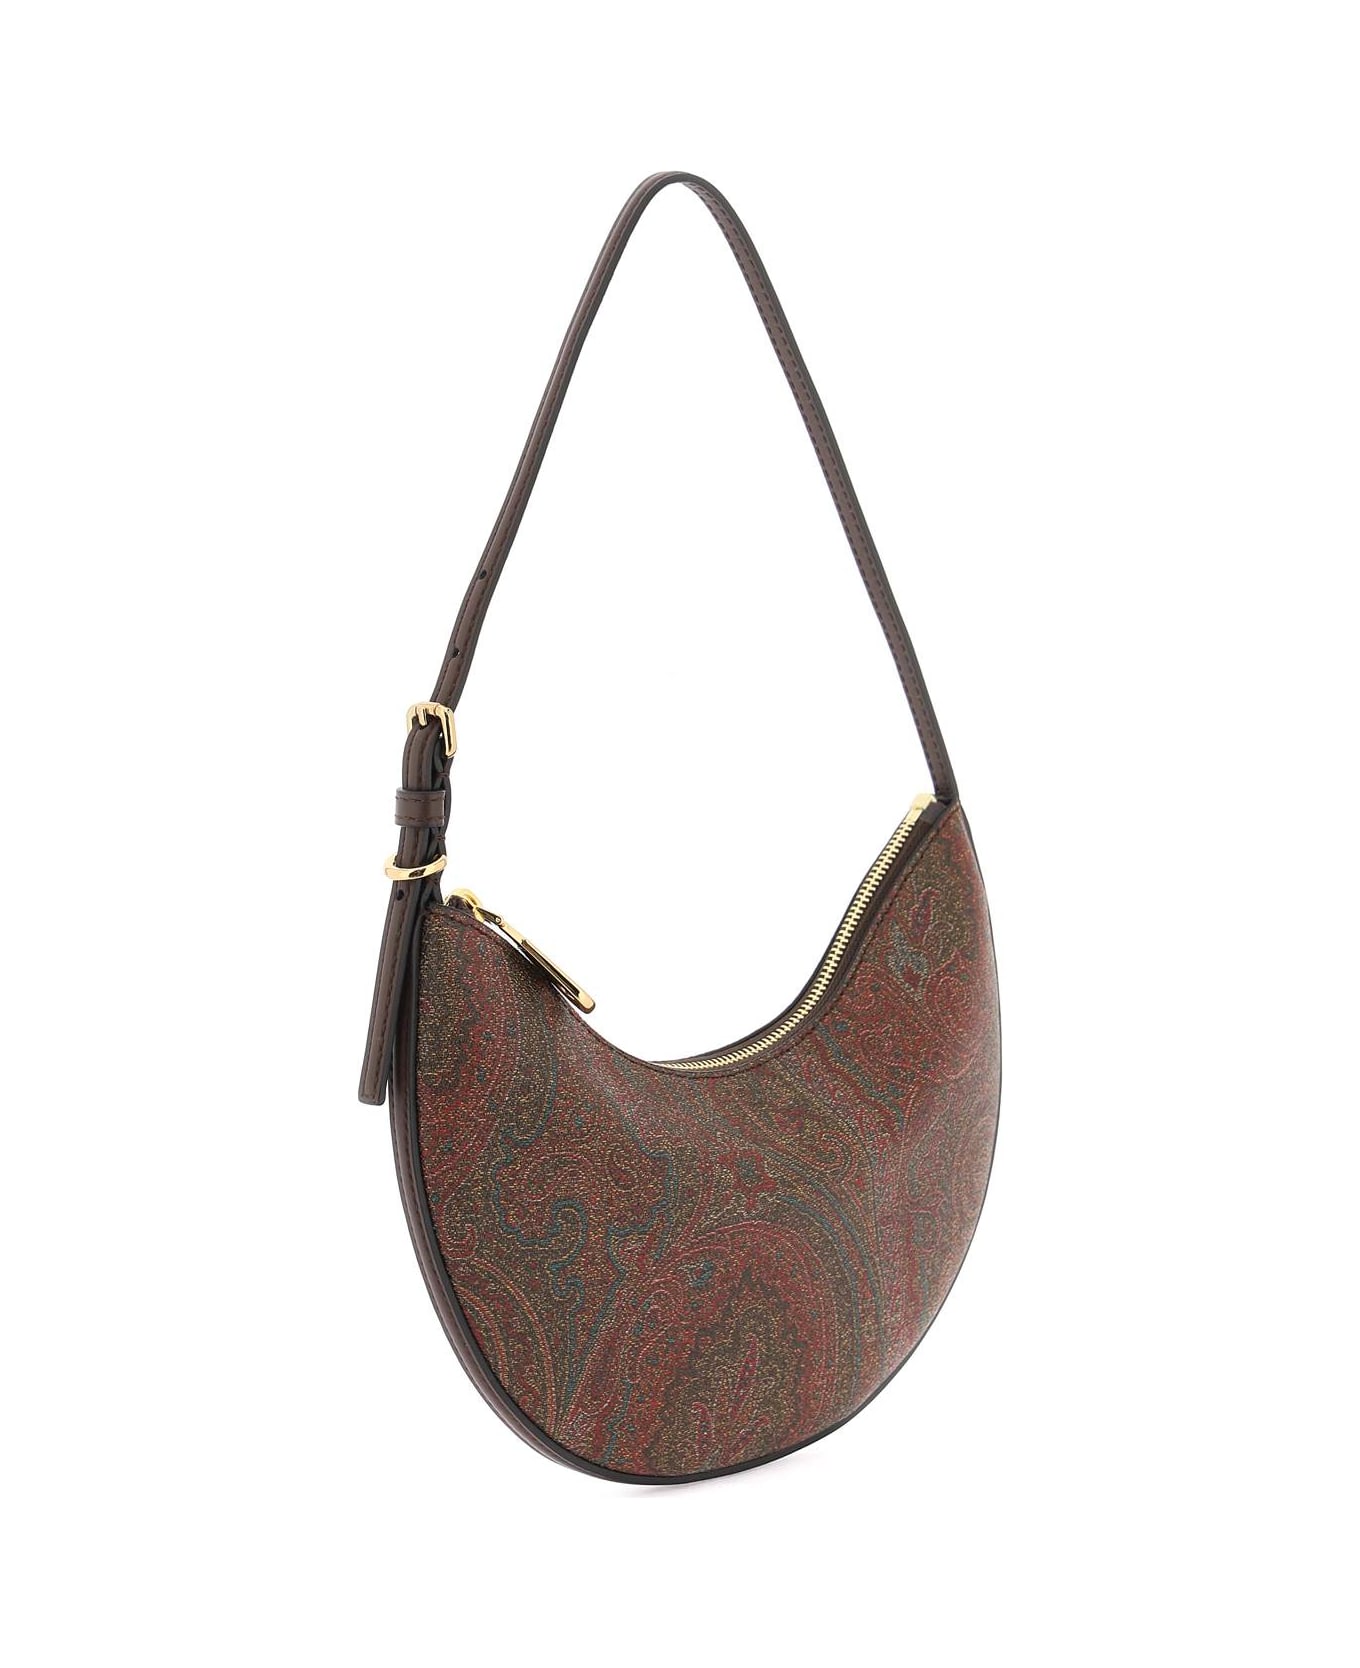 Etro Brown Leather Blend Bag - Brown トートバッグ